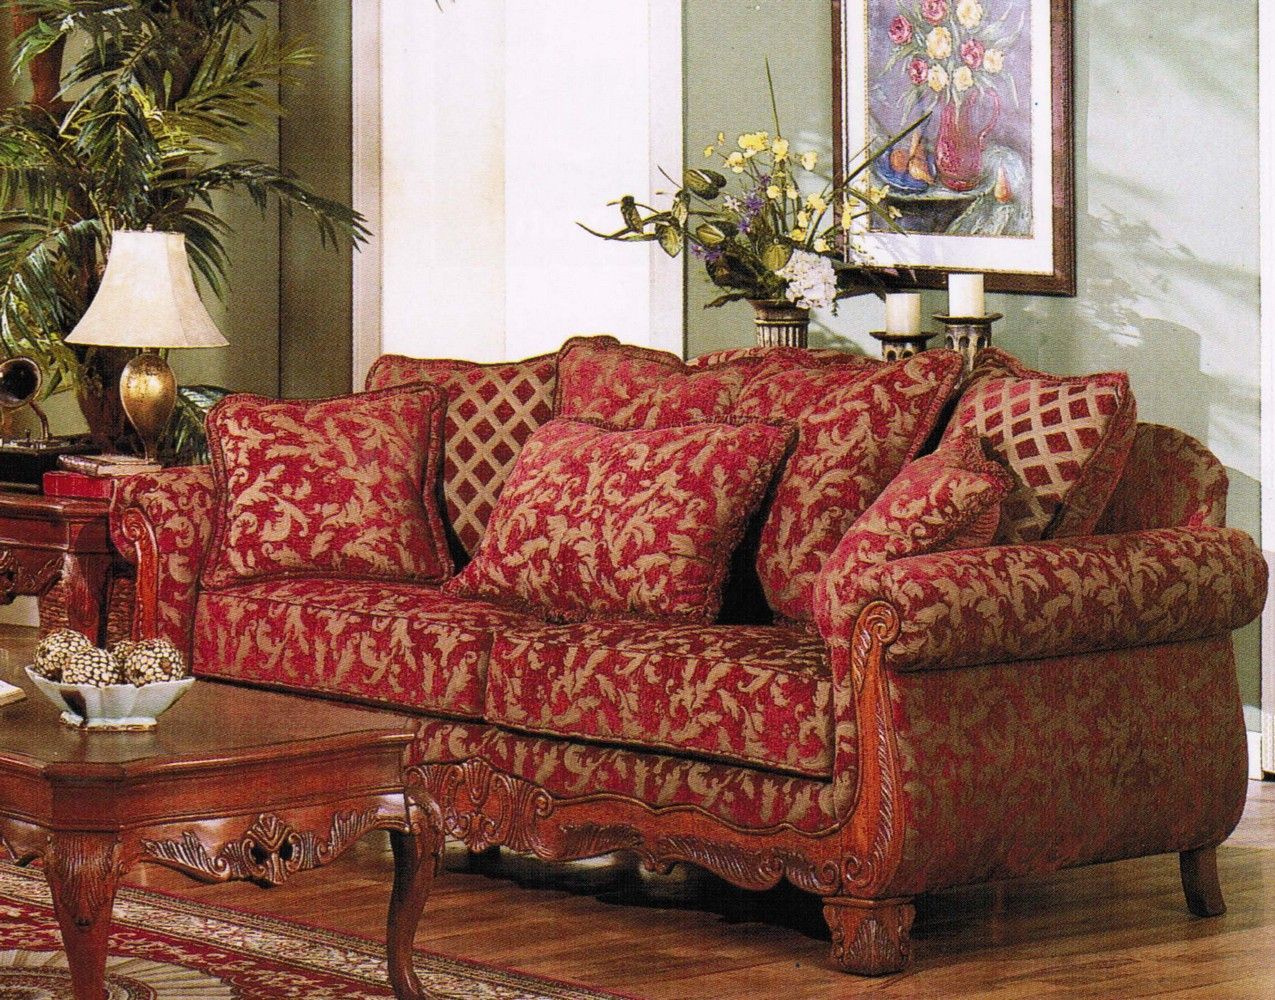 Visiondecor | Printed Sofa, Red Sofa Living Room, Living Room Sofa Regarding Sofas In Pattern (View 2 of 20)